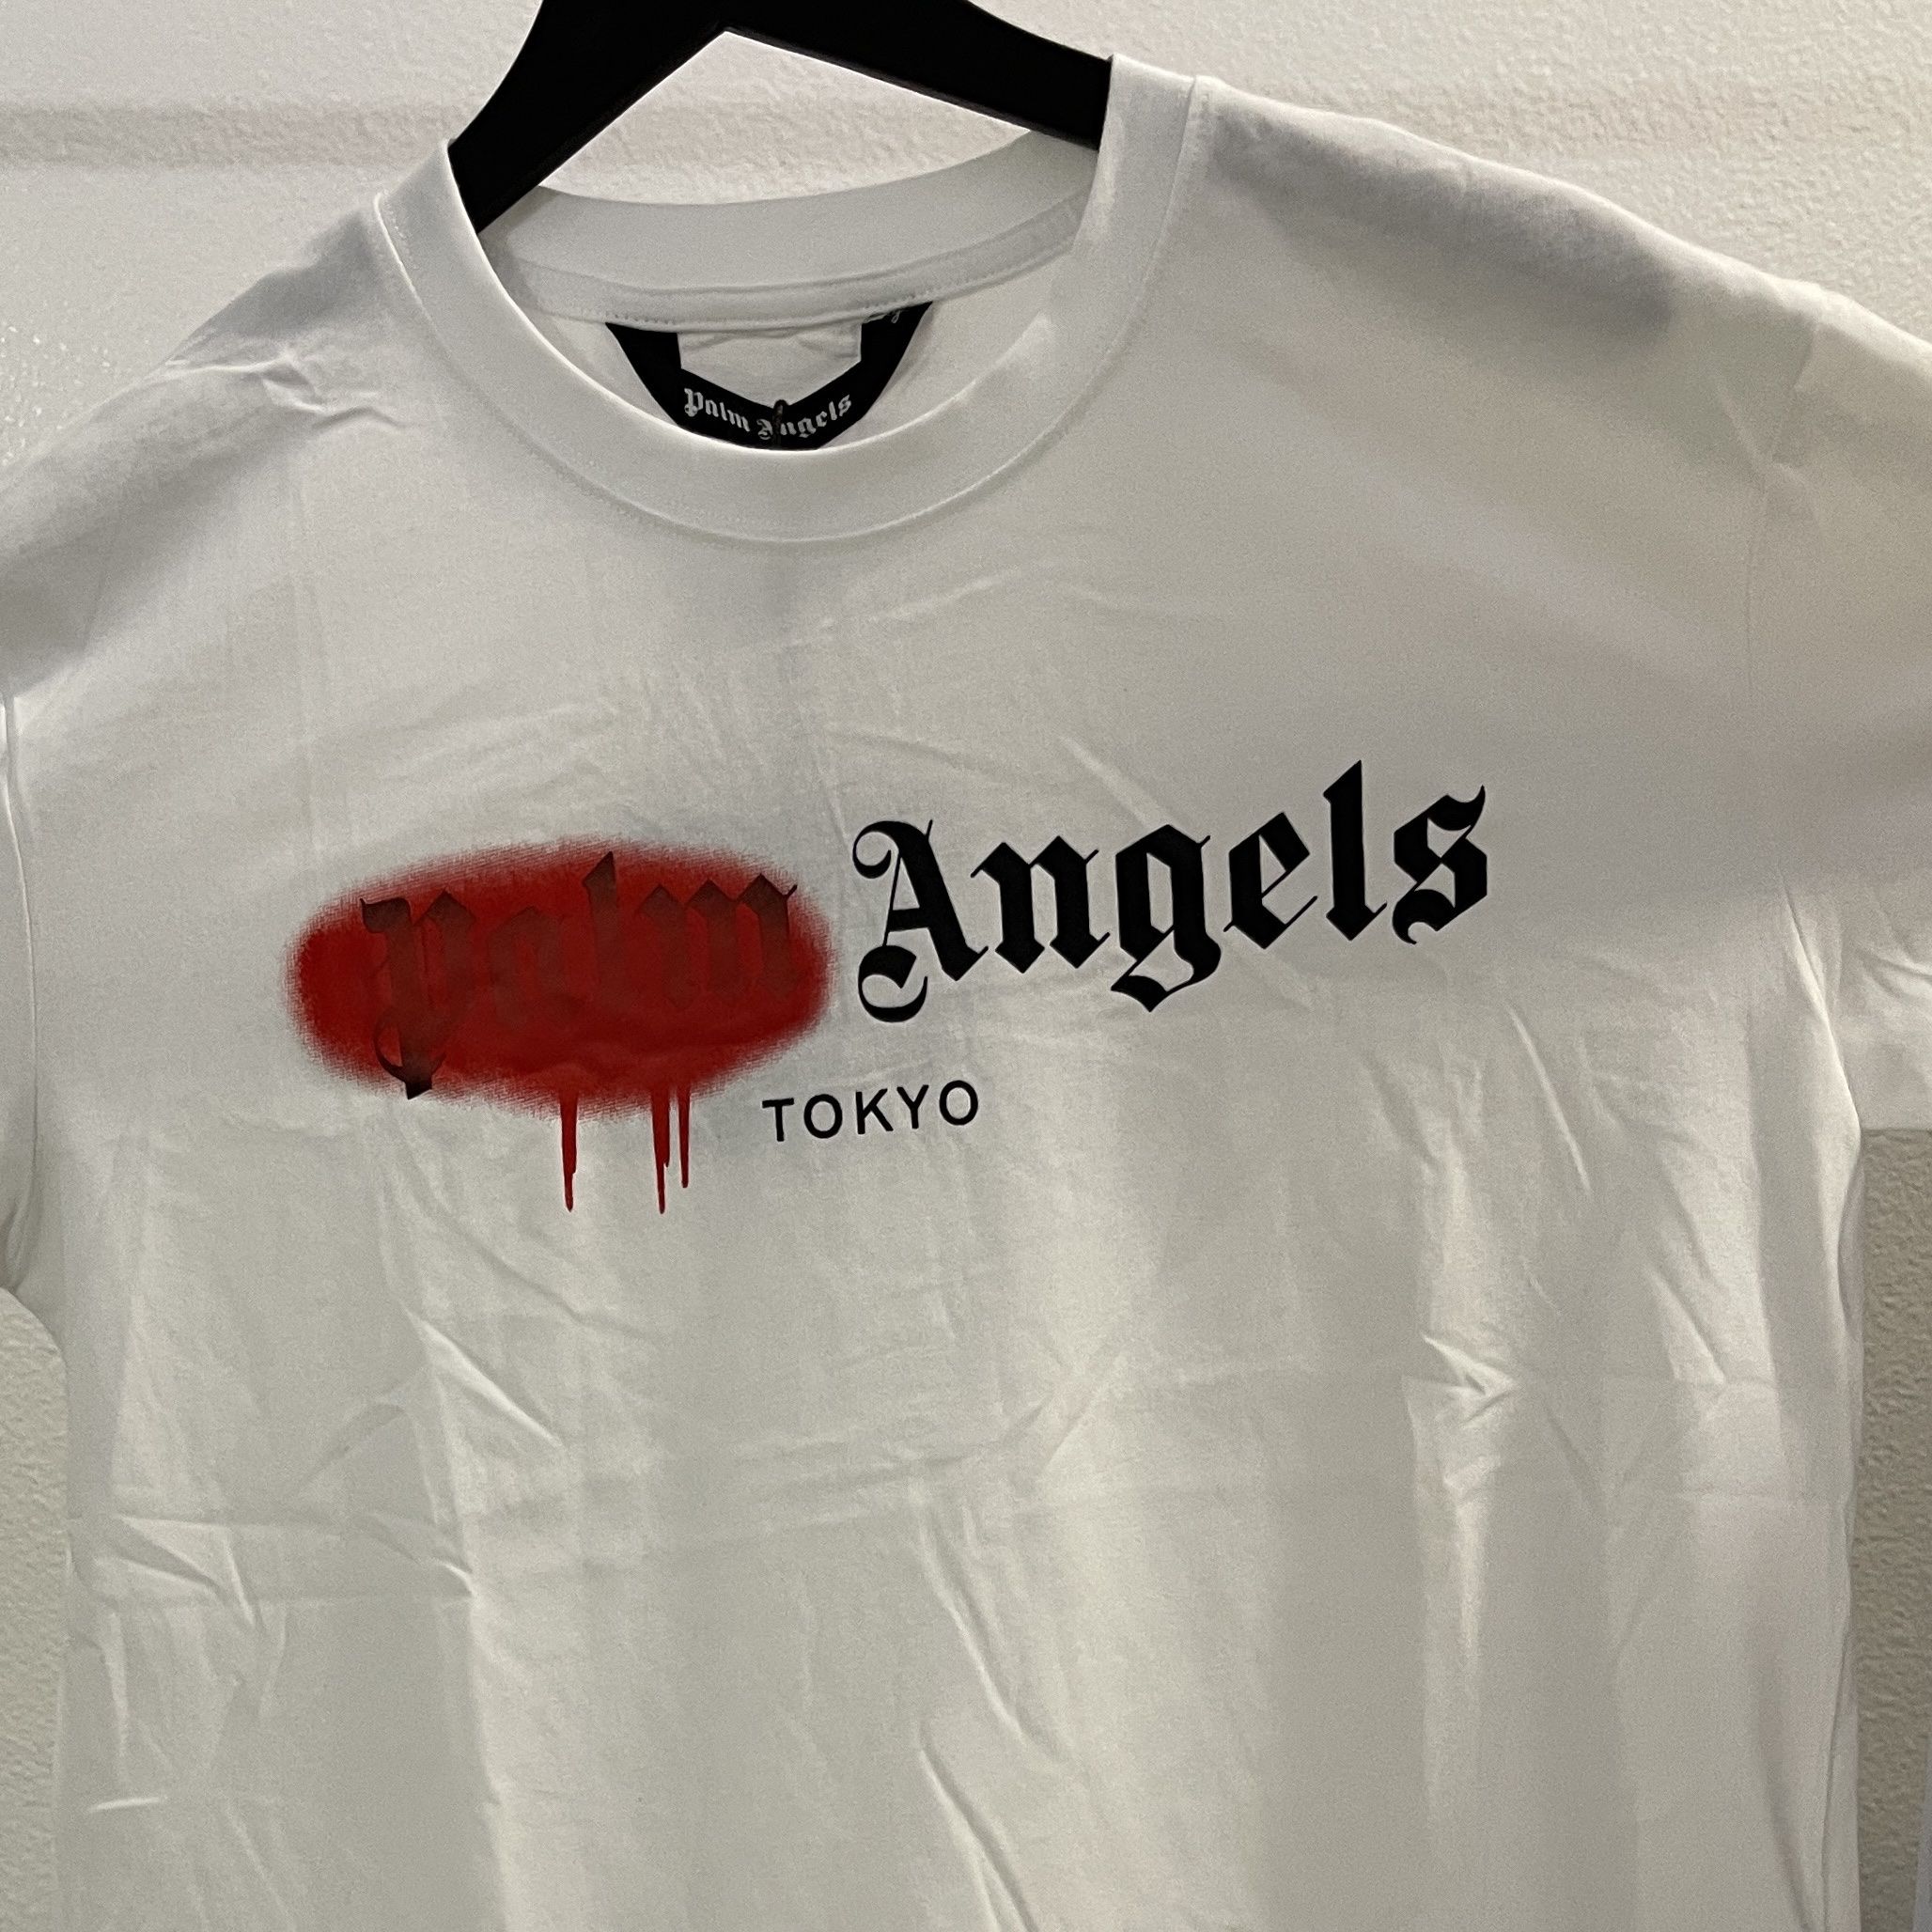 Palm Angels Tshirt Red Spray Paint Tokyo for Sale in Tampa, FL